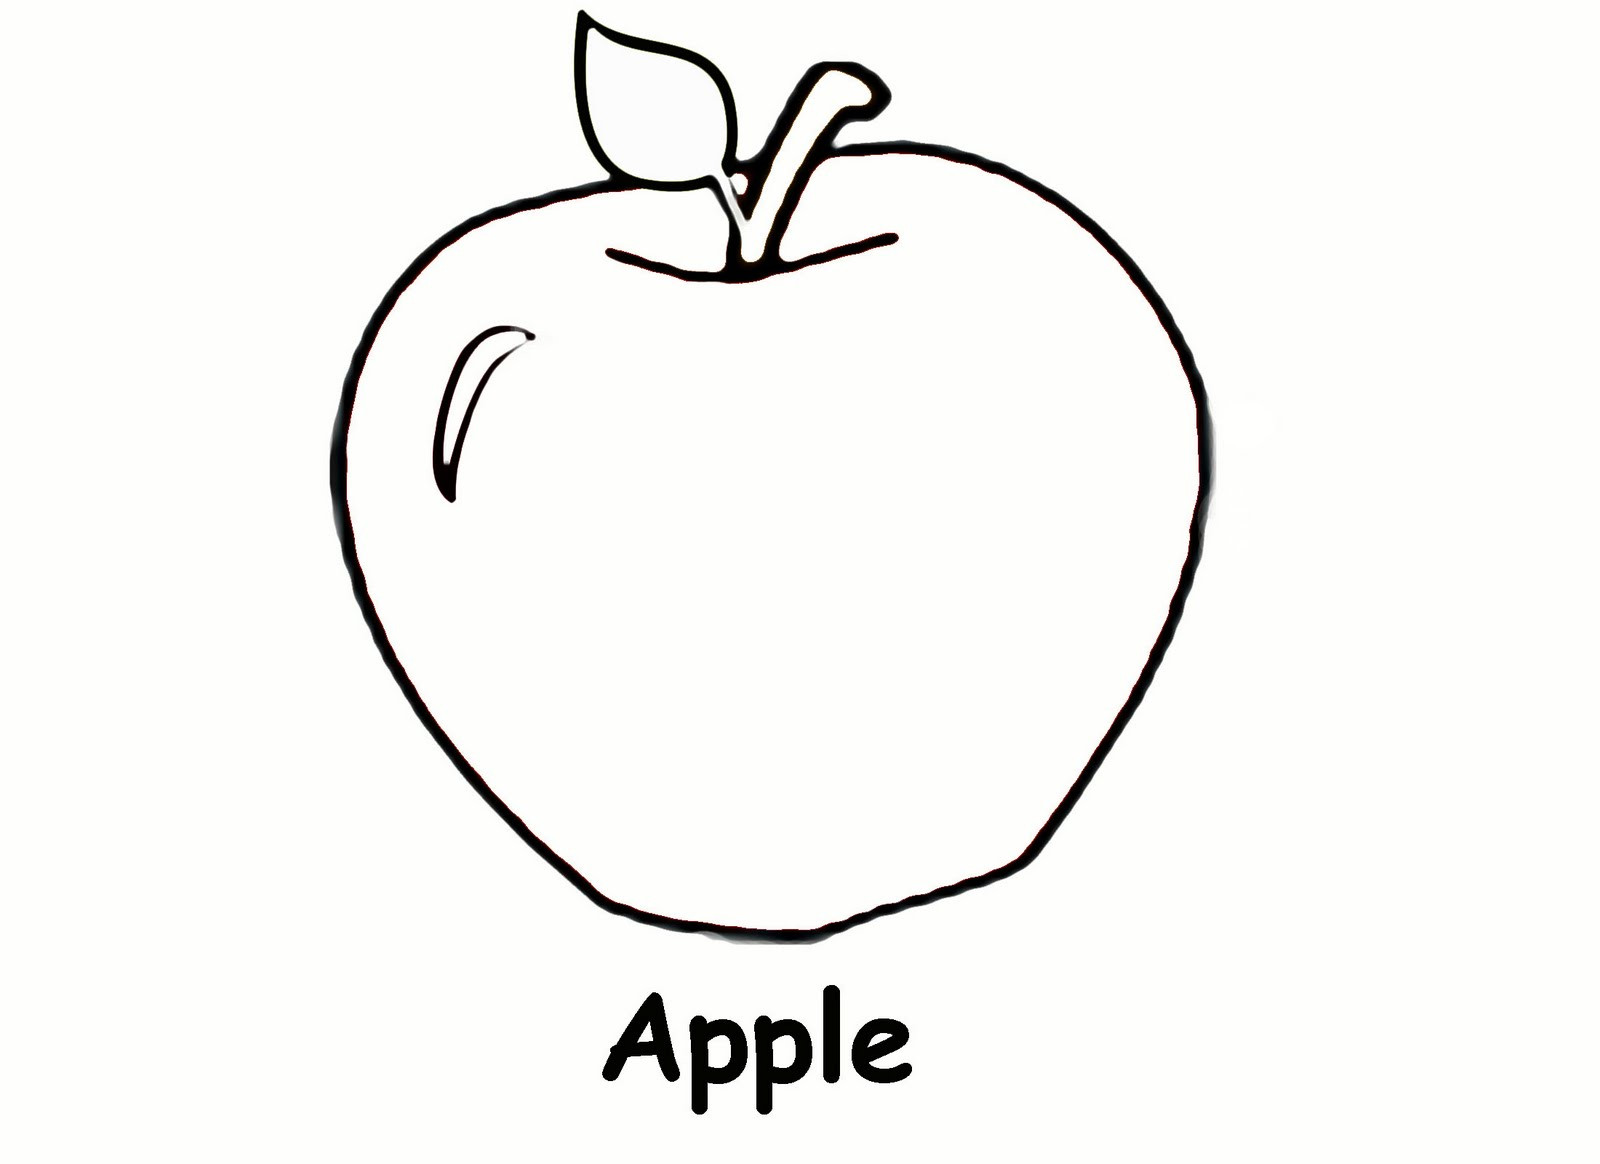 Apple Printable Coloring Pages
 Sidther Free printable preschool level coloring pages